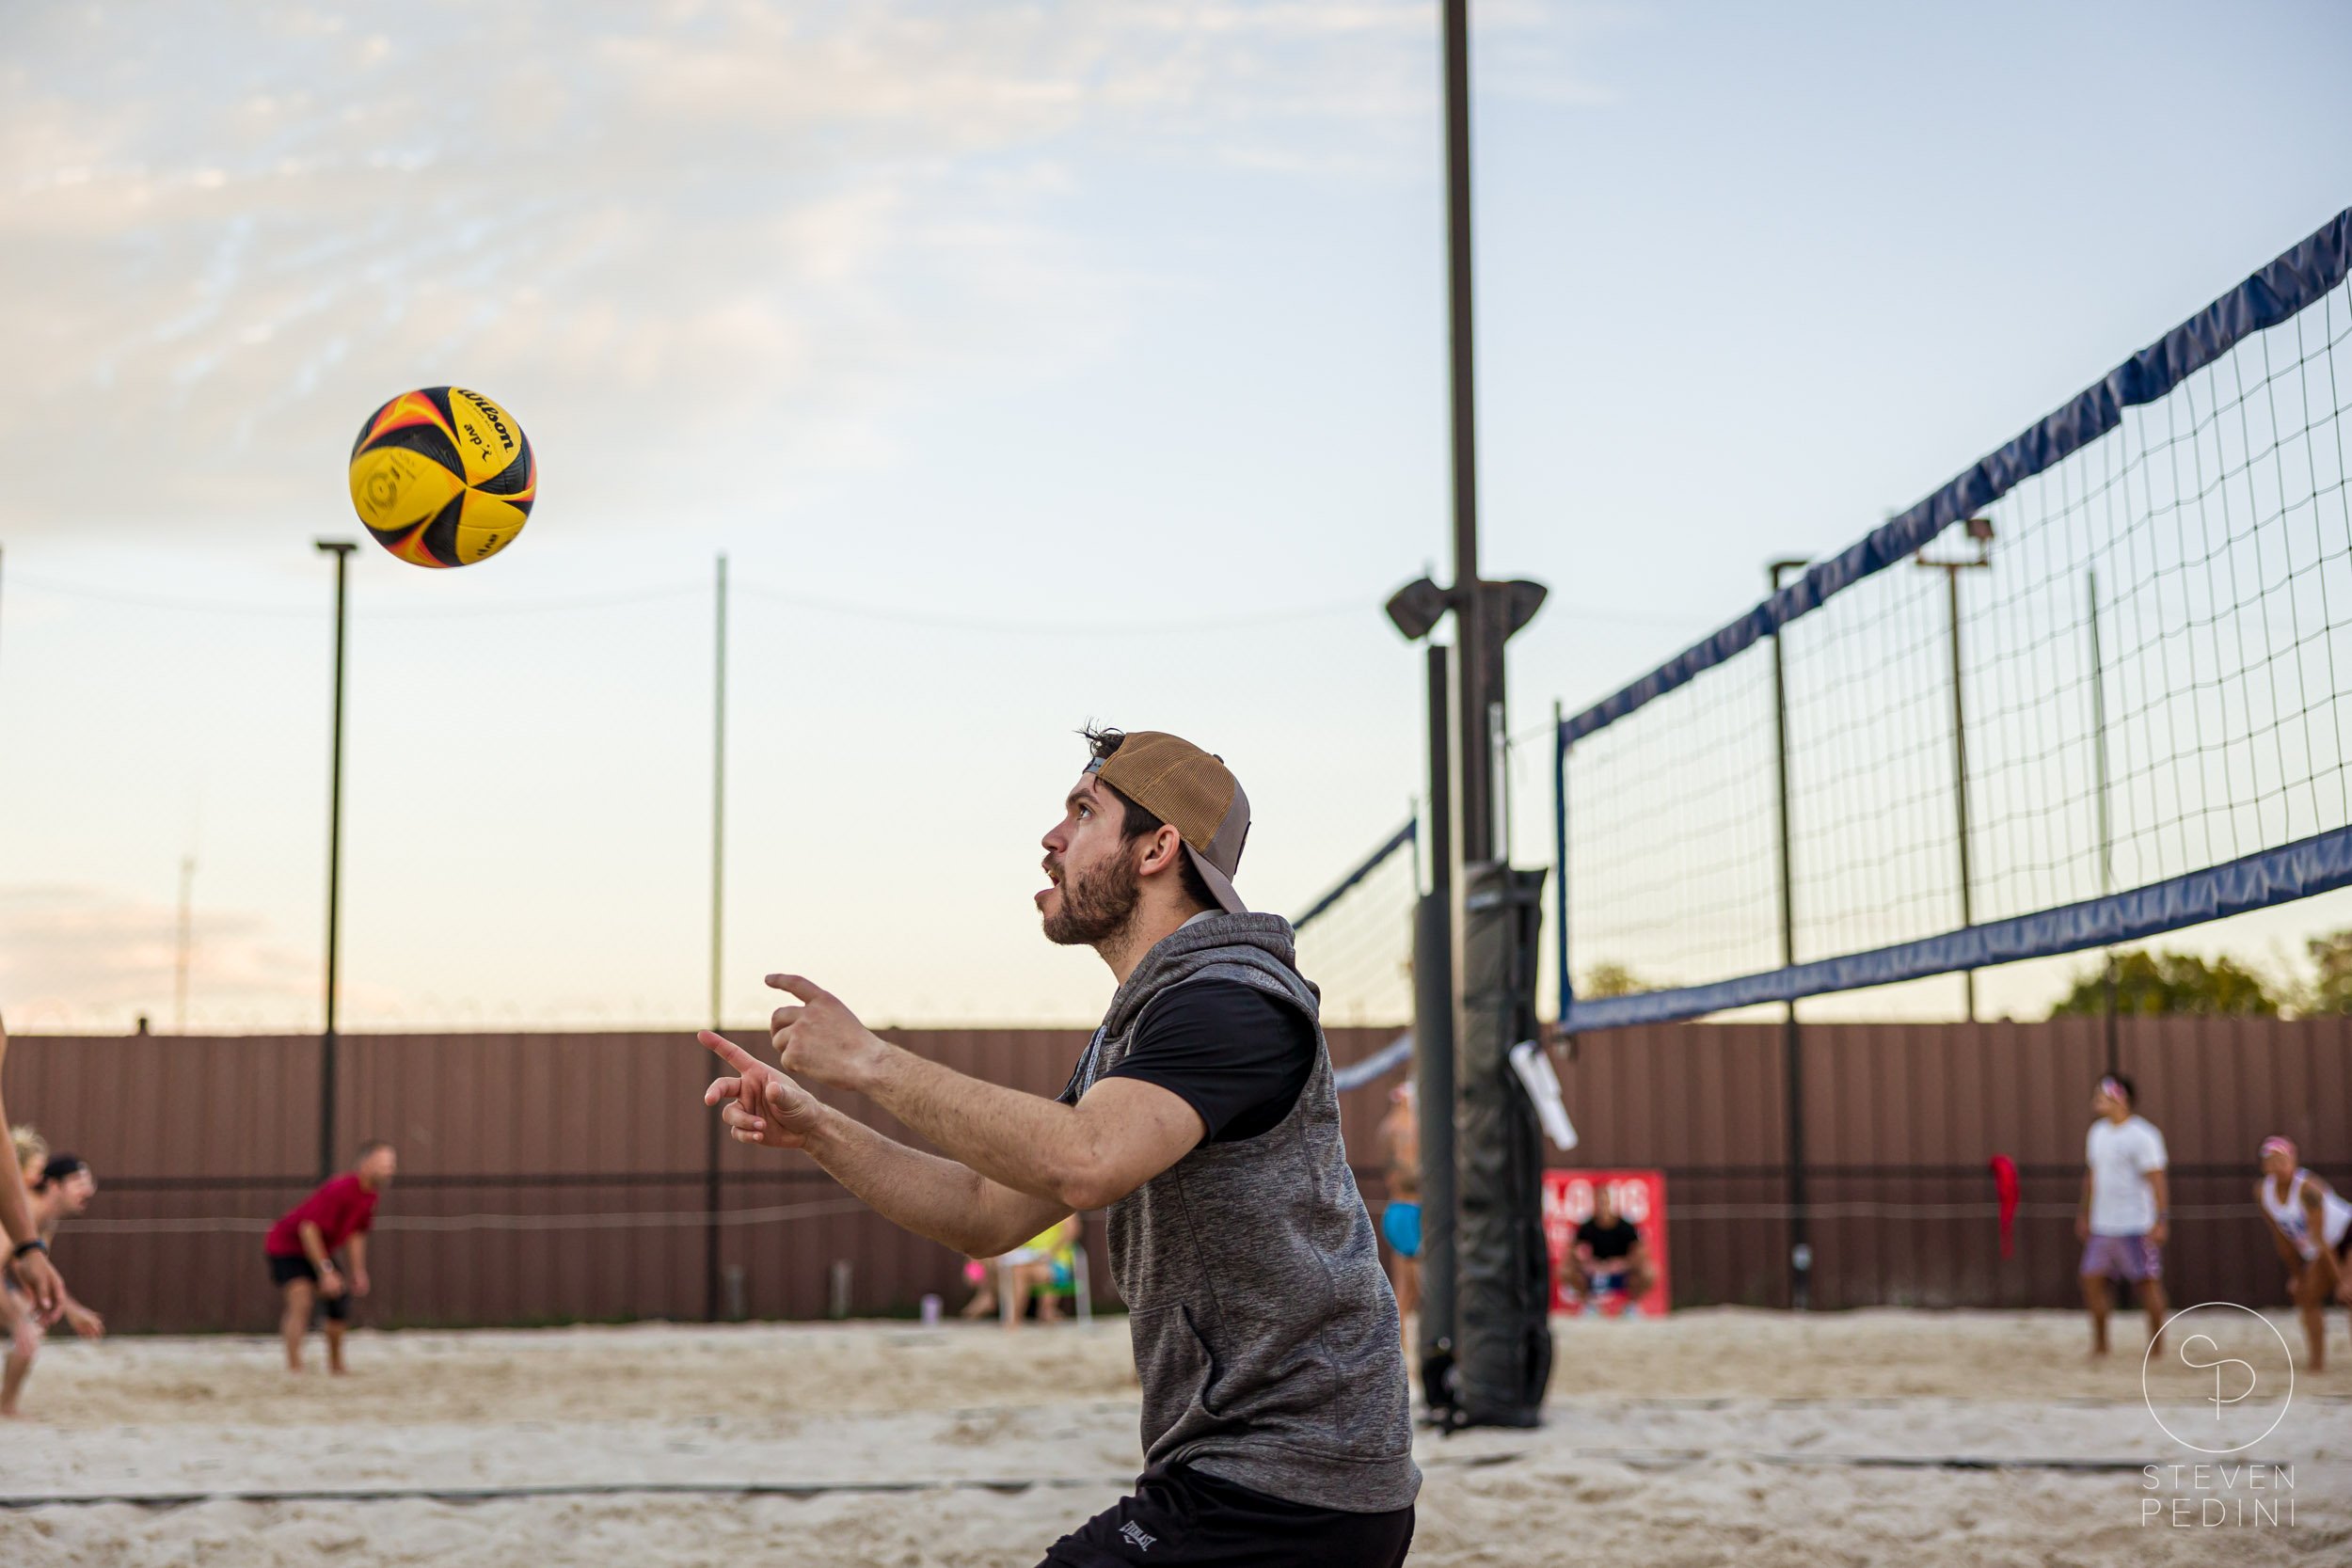 Steven Pedini Photography - Bumpy Pickle - Sand Volleyball - Houston TX - World Cup of Volleyball - 00225.jpg